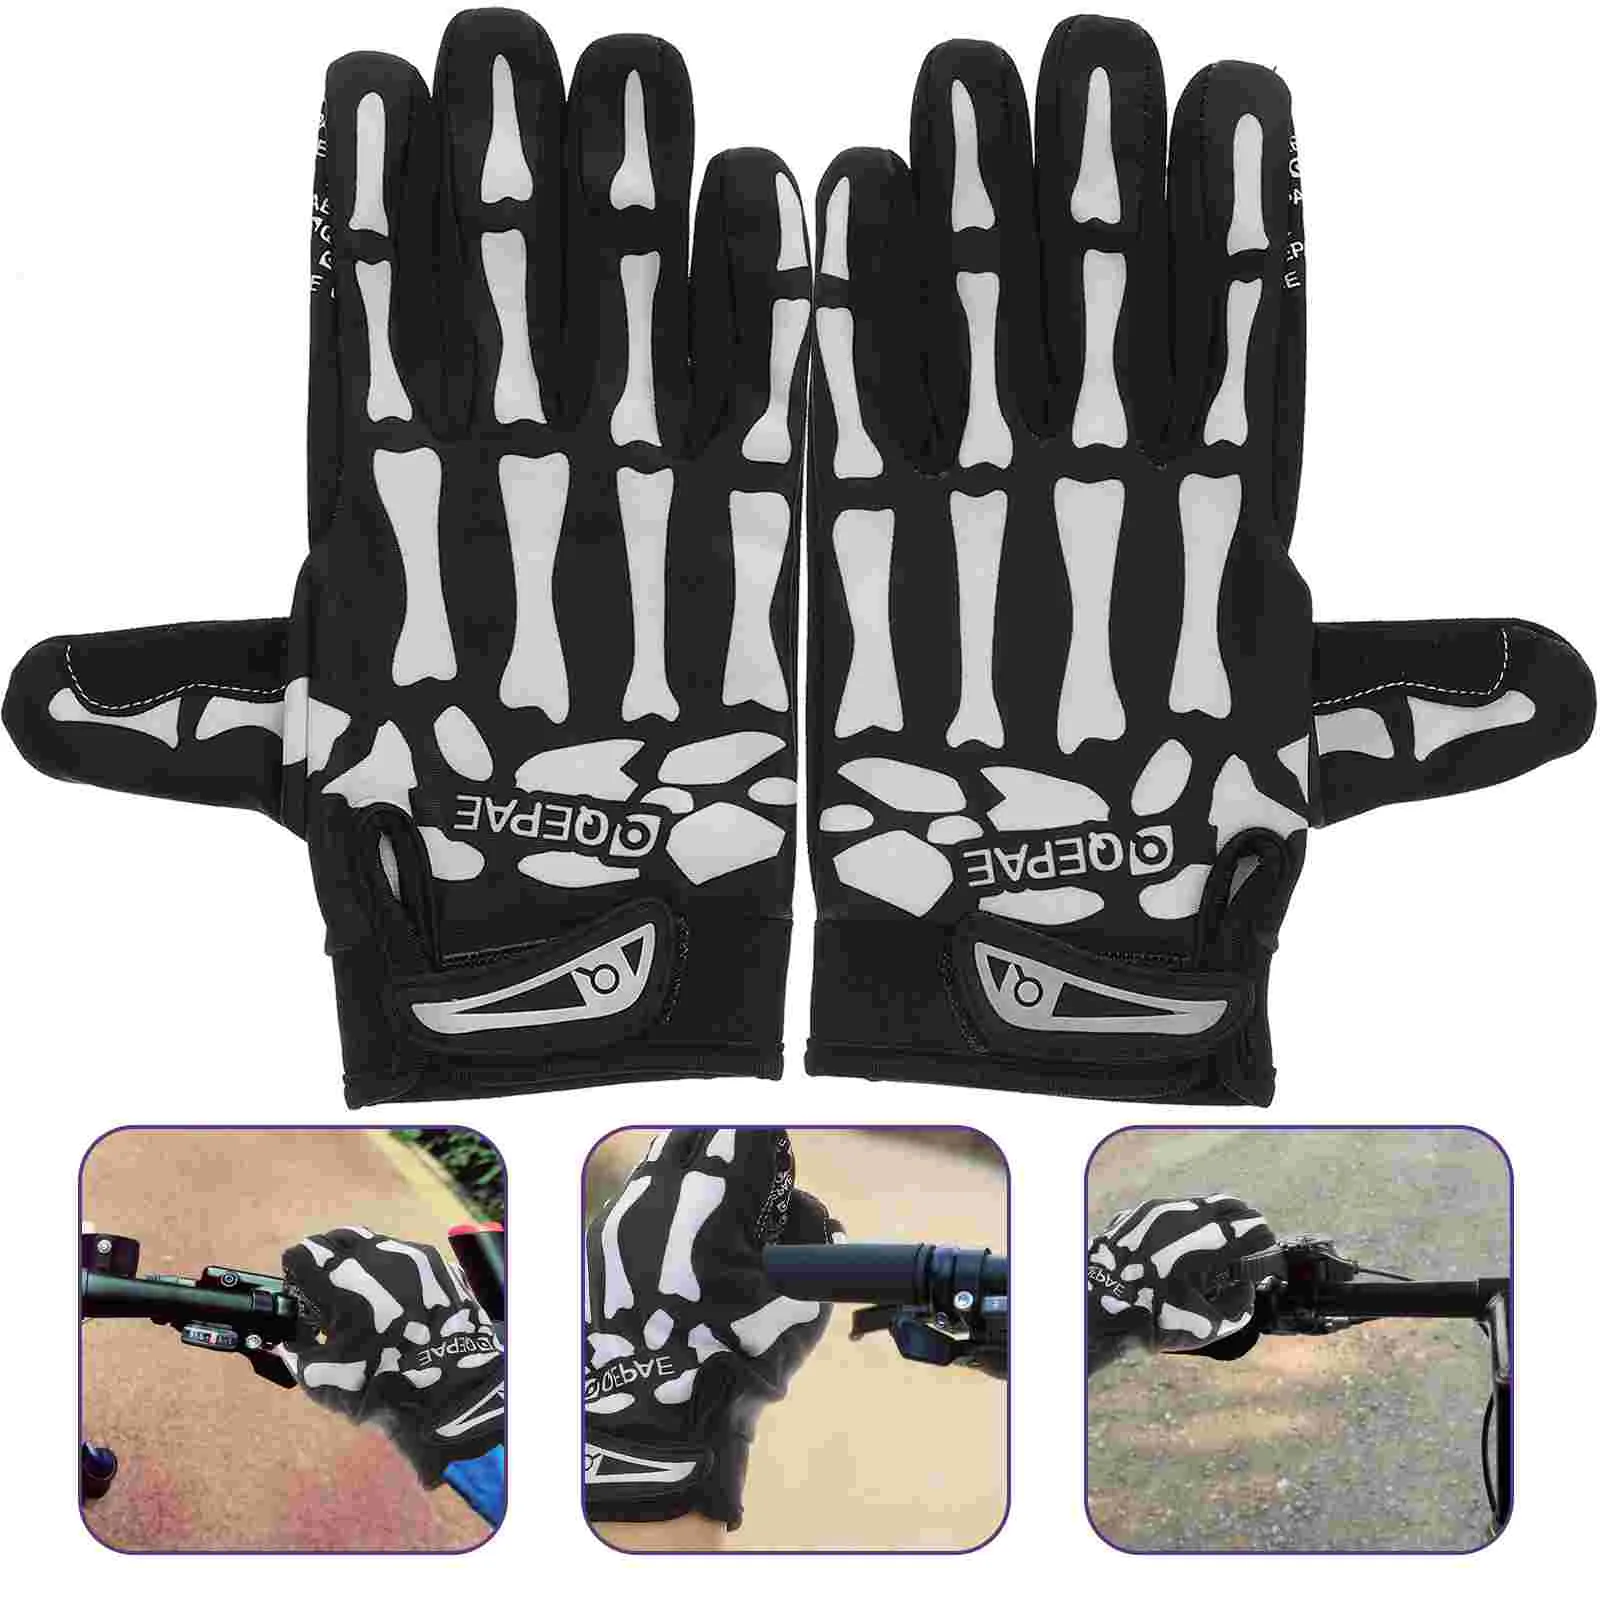 Skull Finger Motorcycle Motorcycle Glove Scary Adults Cycling Ridding Paw Black Unisex Autumn and Winter